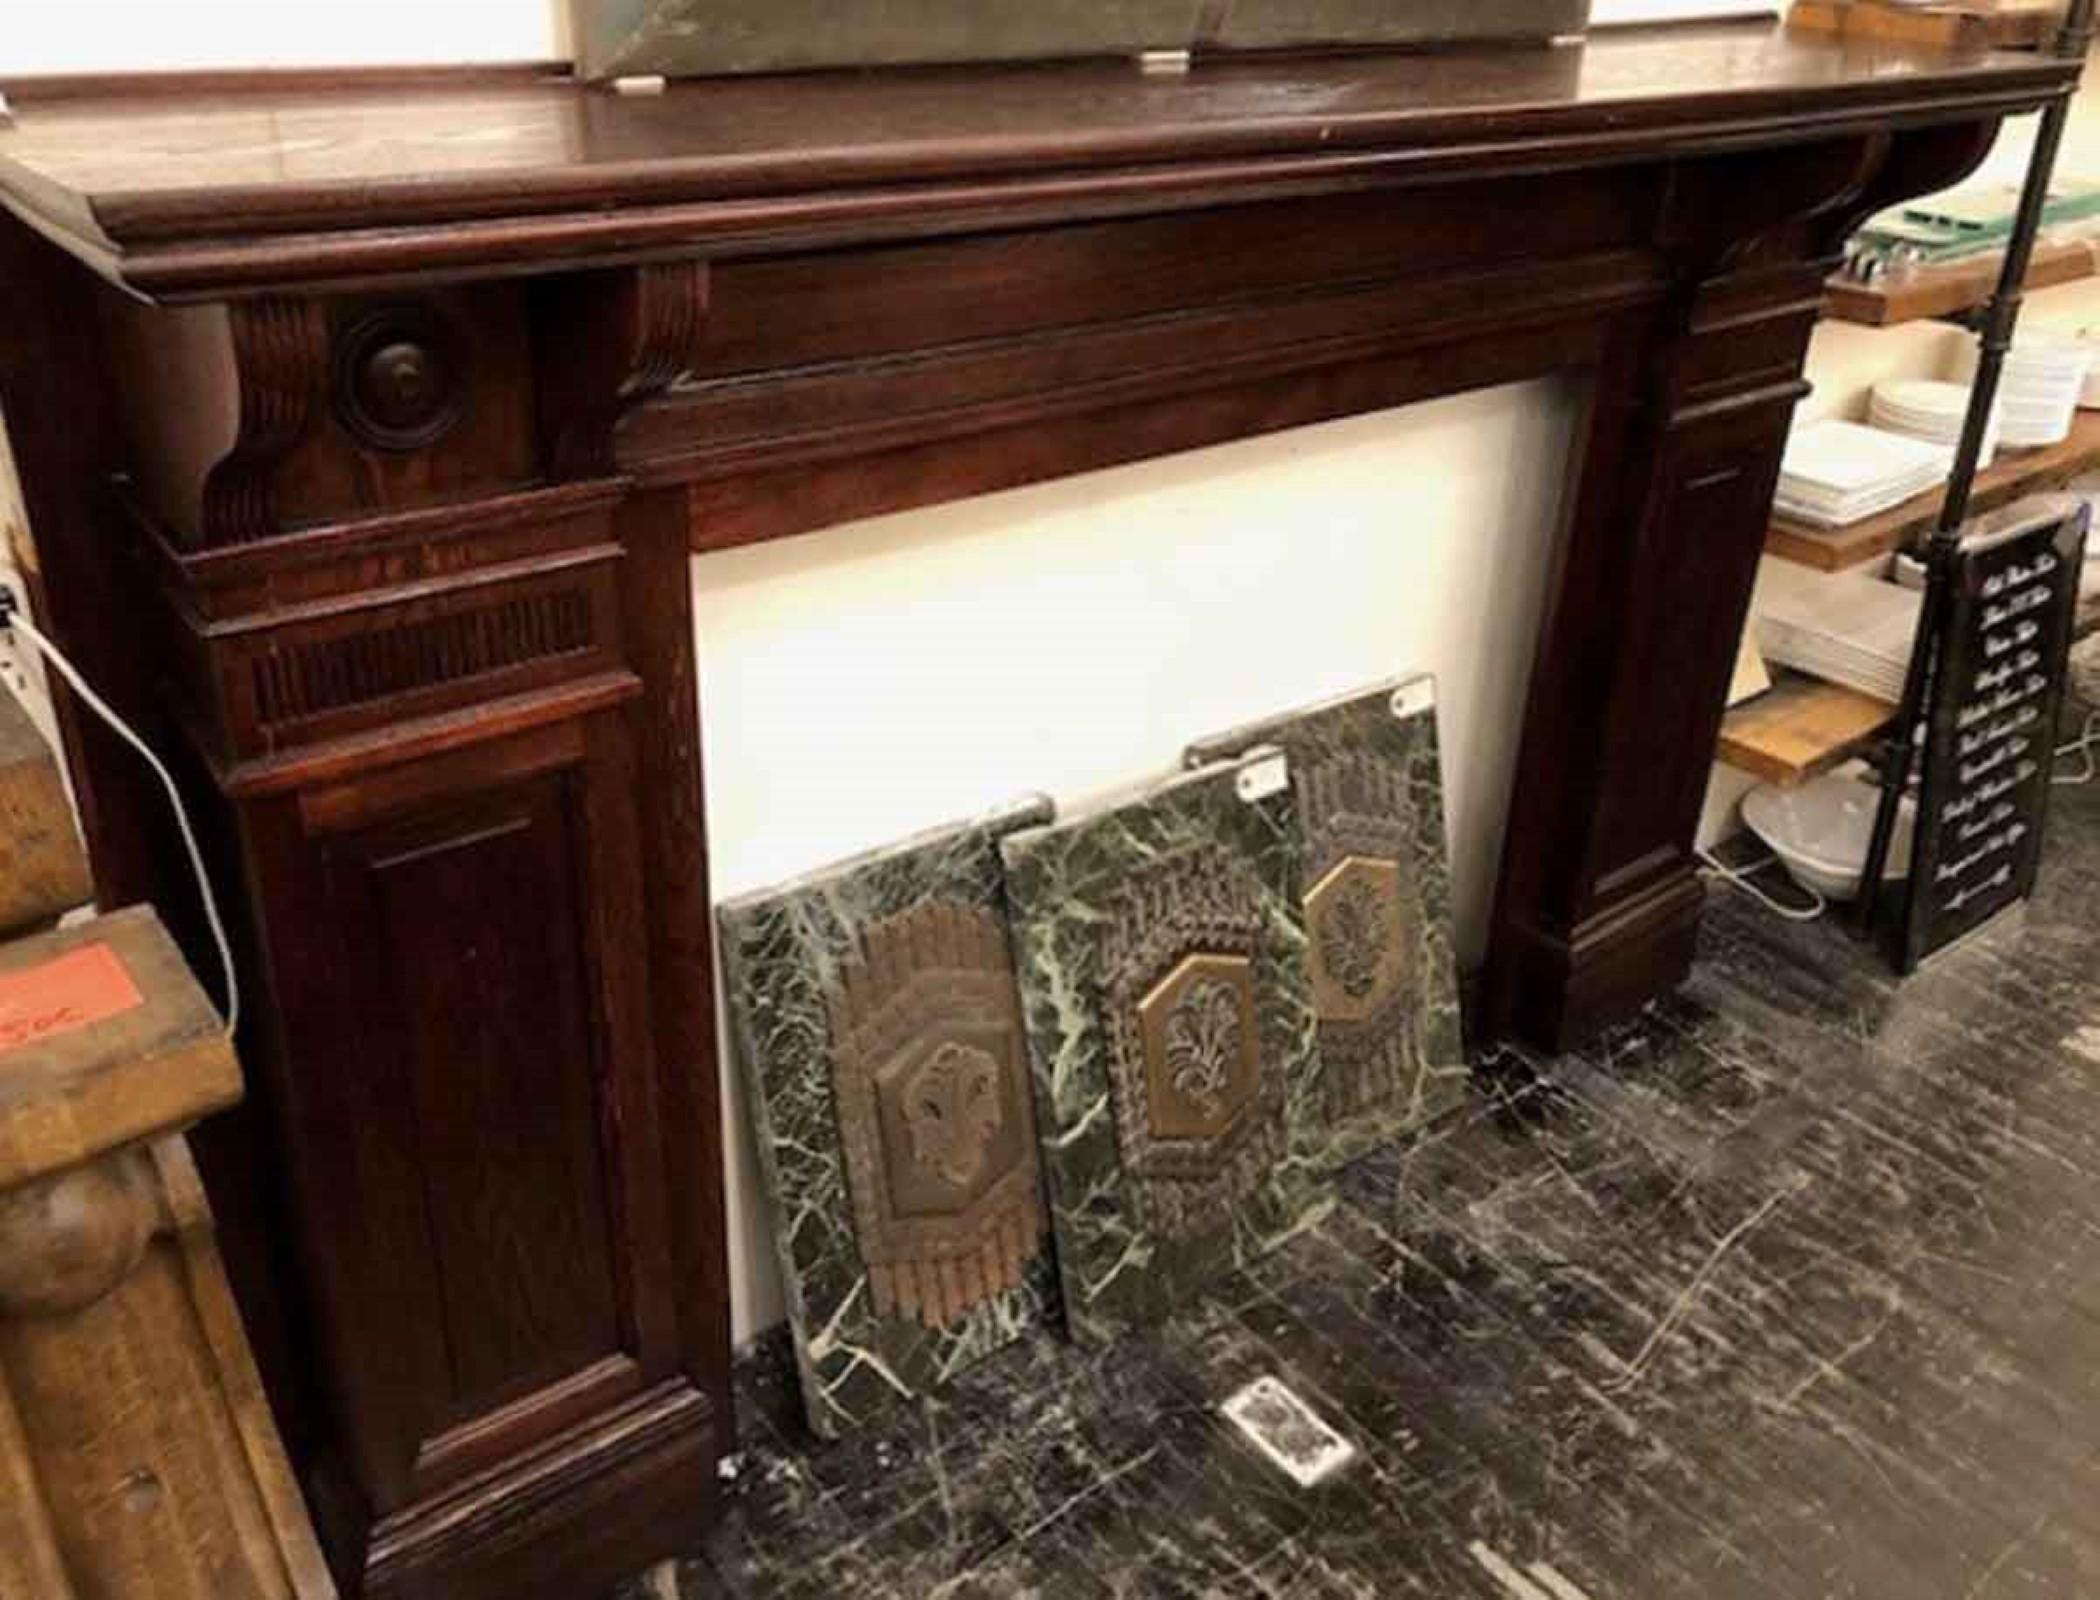 1920s dark stained oak mantel with simple lines and bulls eye details. This was reclaimed from a residence on West 85th St in Manhattan. This can be seen at our 302 Bowery location in NoHo in Manhattan.